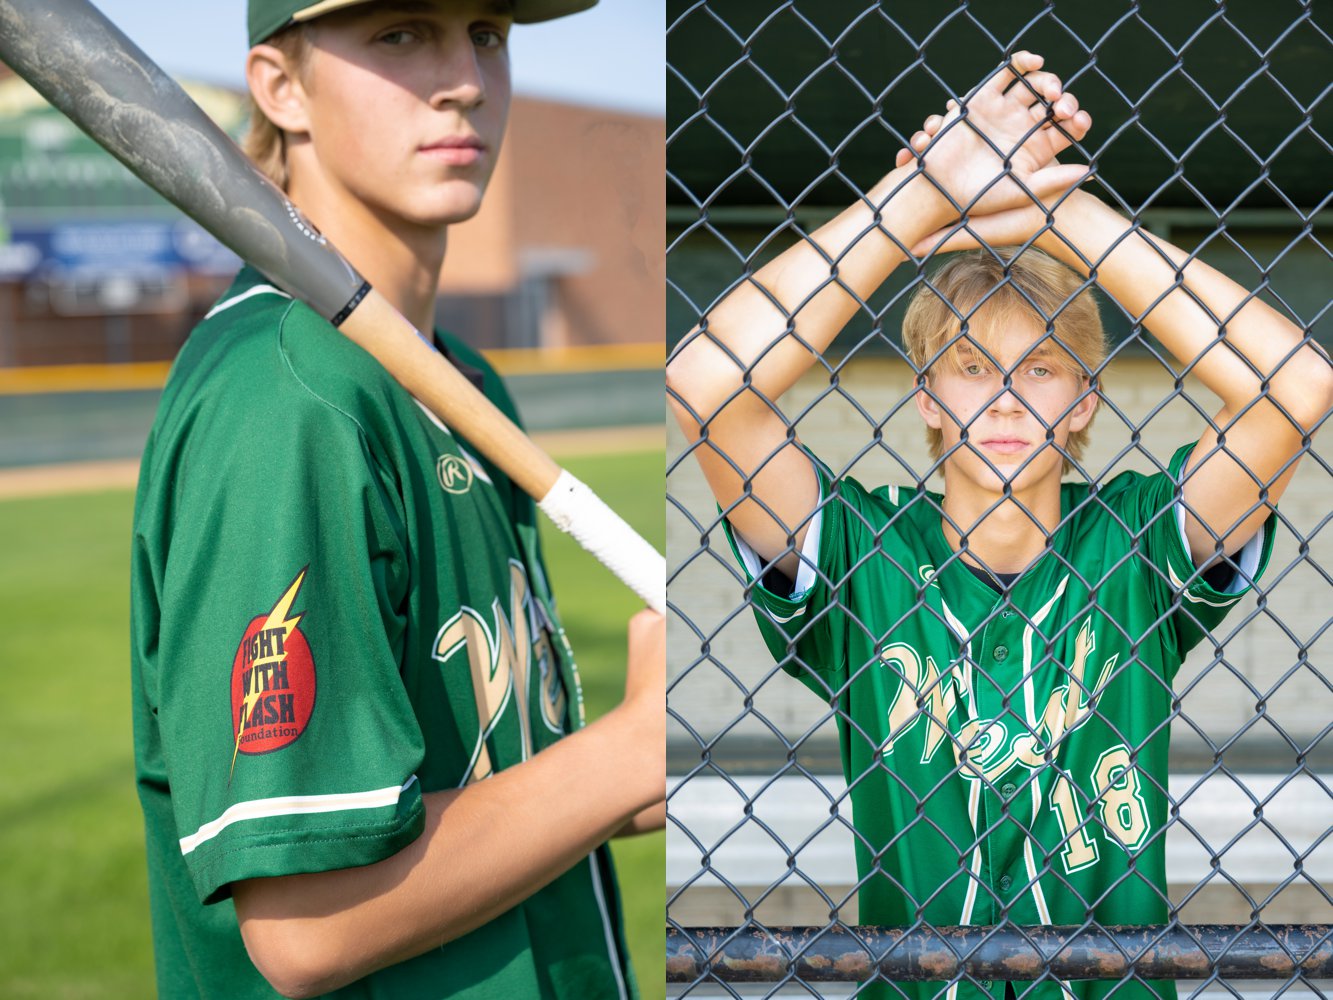 2 images of Cole at Iowa City West High School's baseball field holding a bat in one and looking through the dugout fence in the other